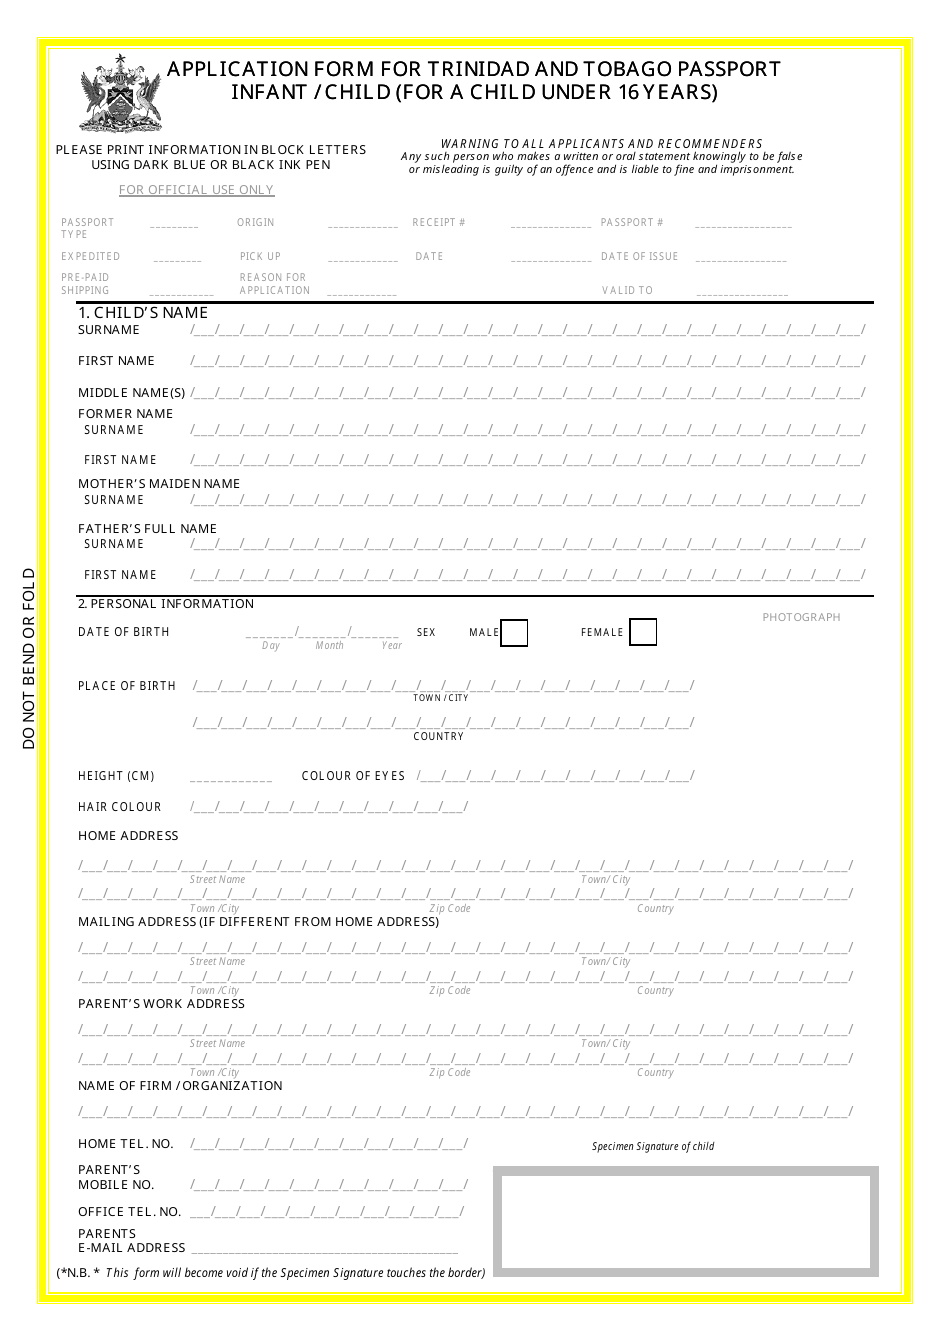 Application Form for Trinidad and Tobago Passport Infant / Child (For a Child Under 16 Years) - Trinidad and Tobago, Page 1